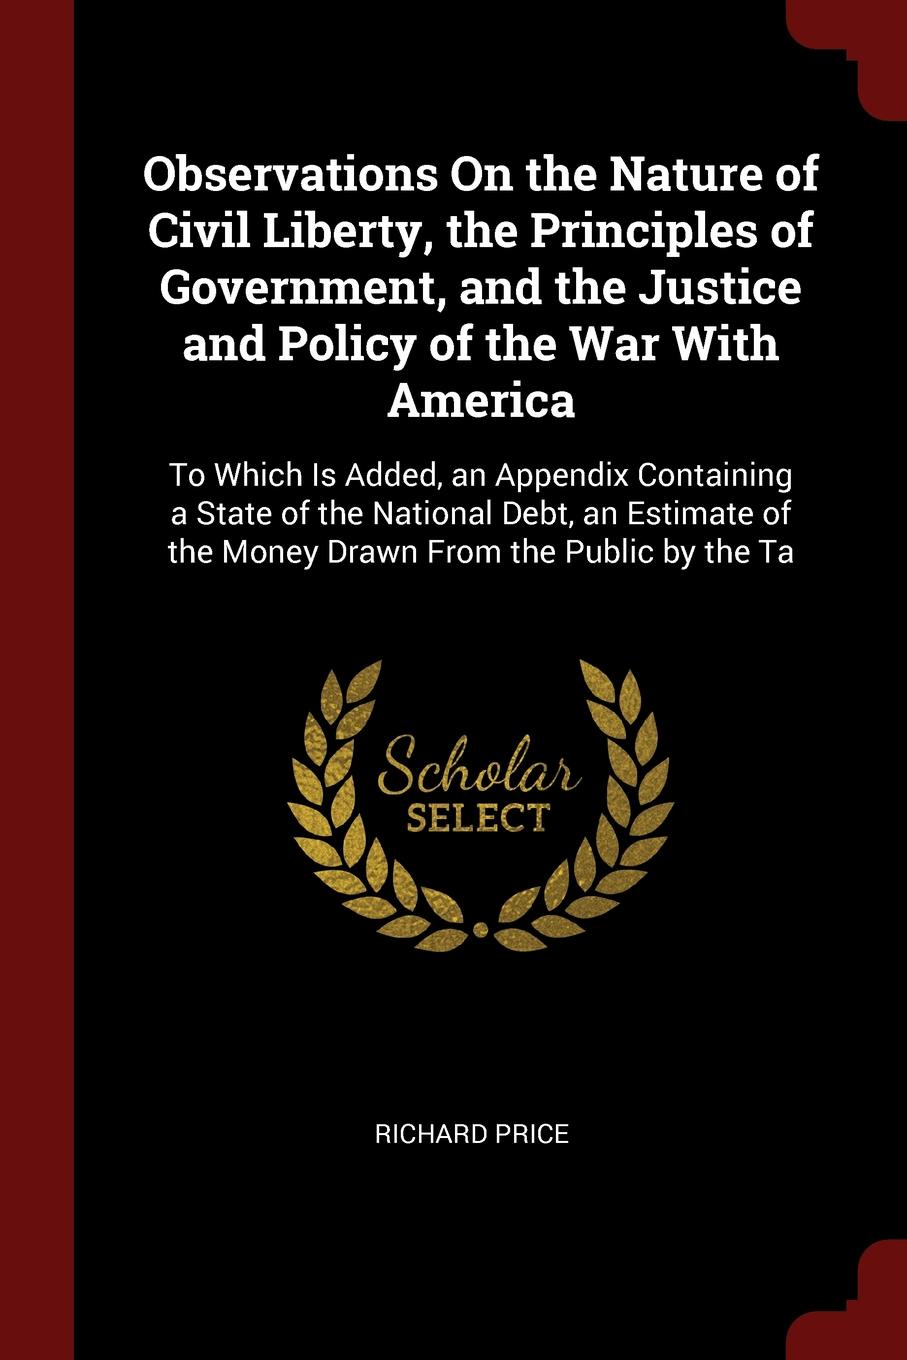 Observations On the Nature of Civil Liberty, the Principles of Government, and the Justice and Policy of the War With America. To Which Is Added, an Appendix Containing a State of the National Debt, an Estimate of the Money Drawn From the Public b...